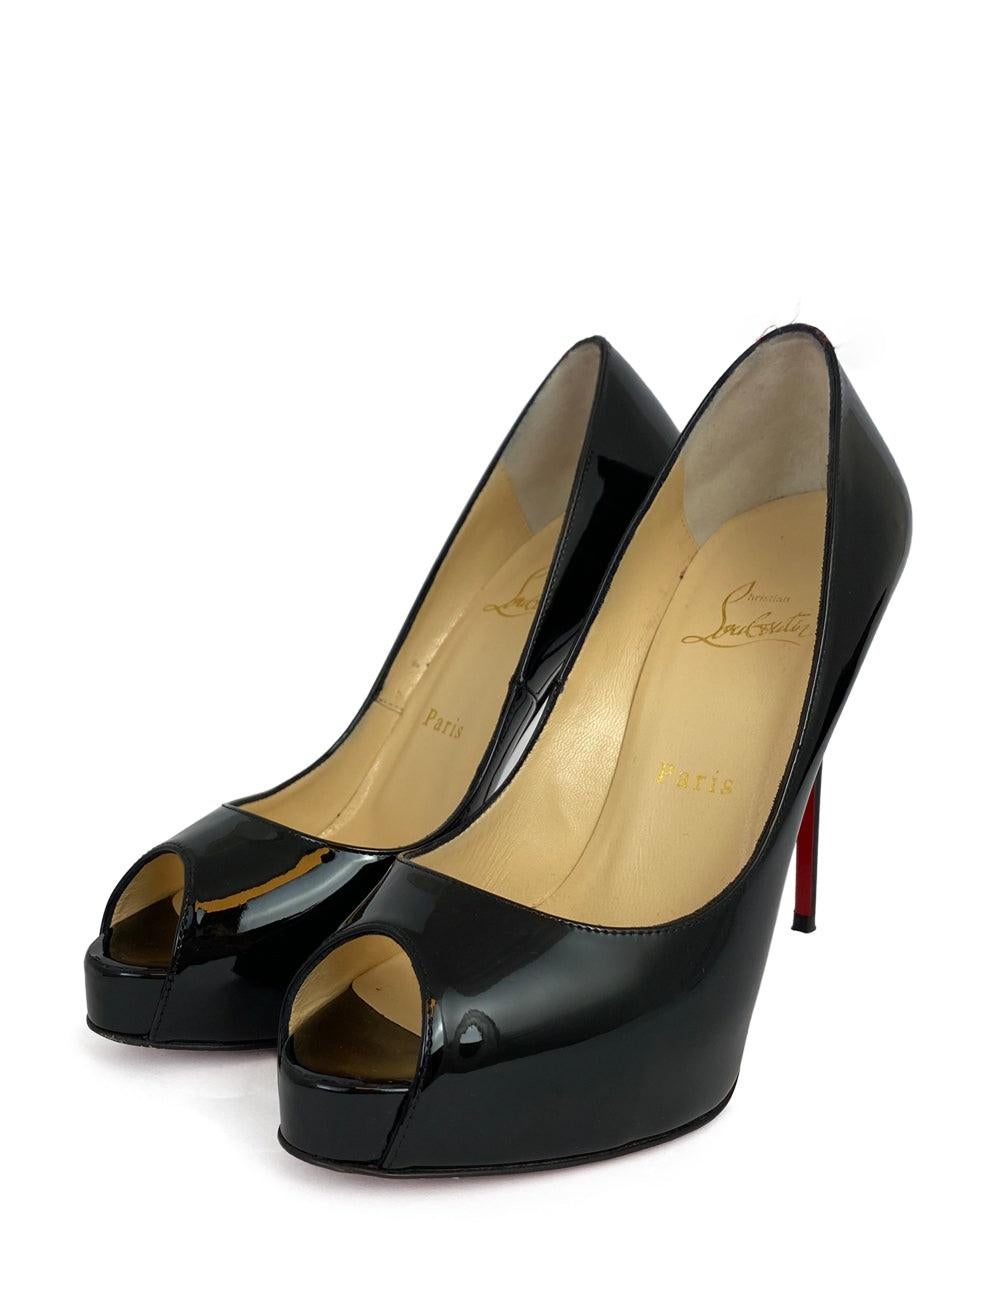 Christian Louboutin EU 37.5 Black Patent Leather Open-Toed Pumps In Good Condition For Sale In Amman, JO